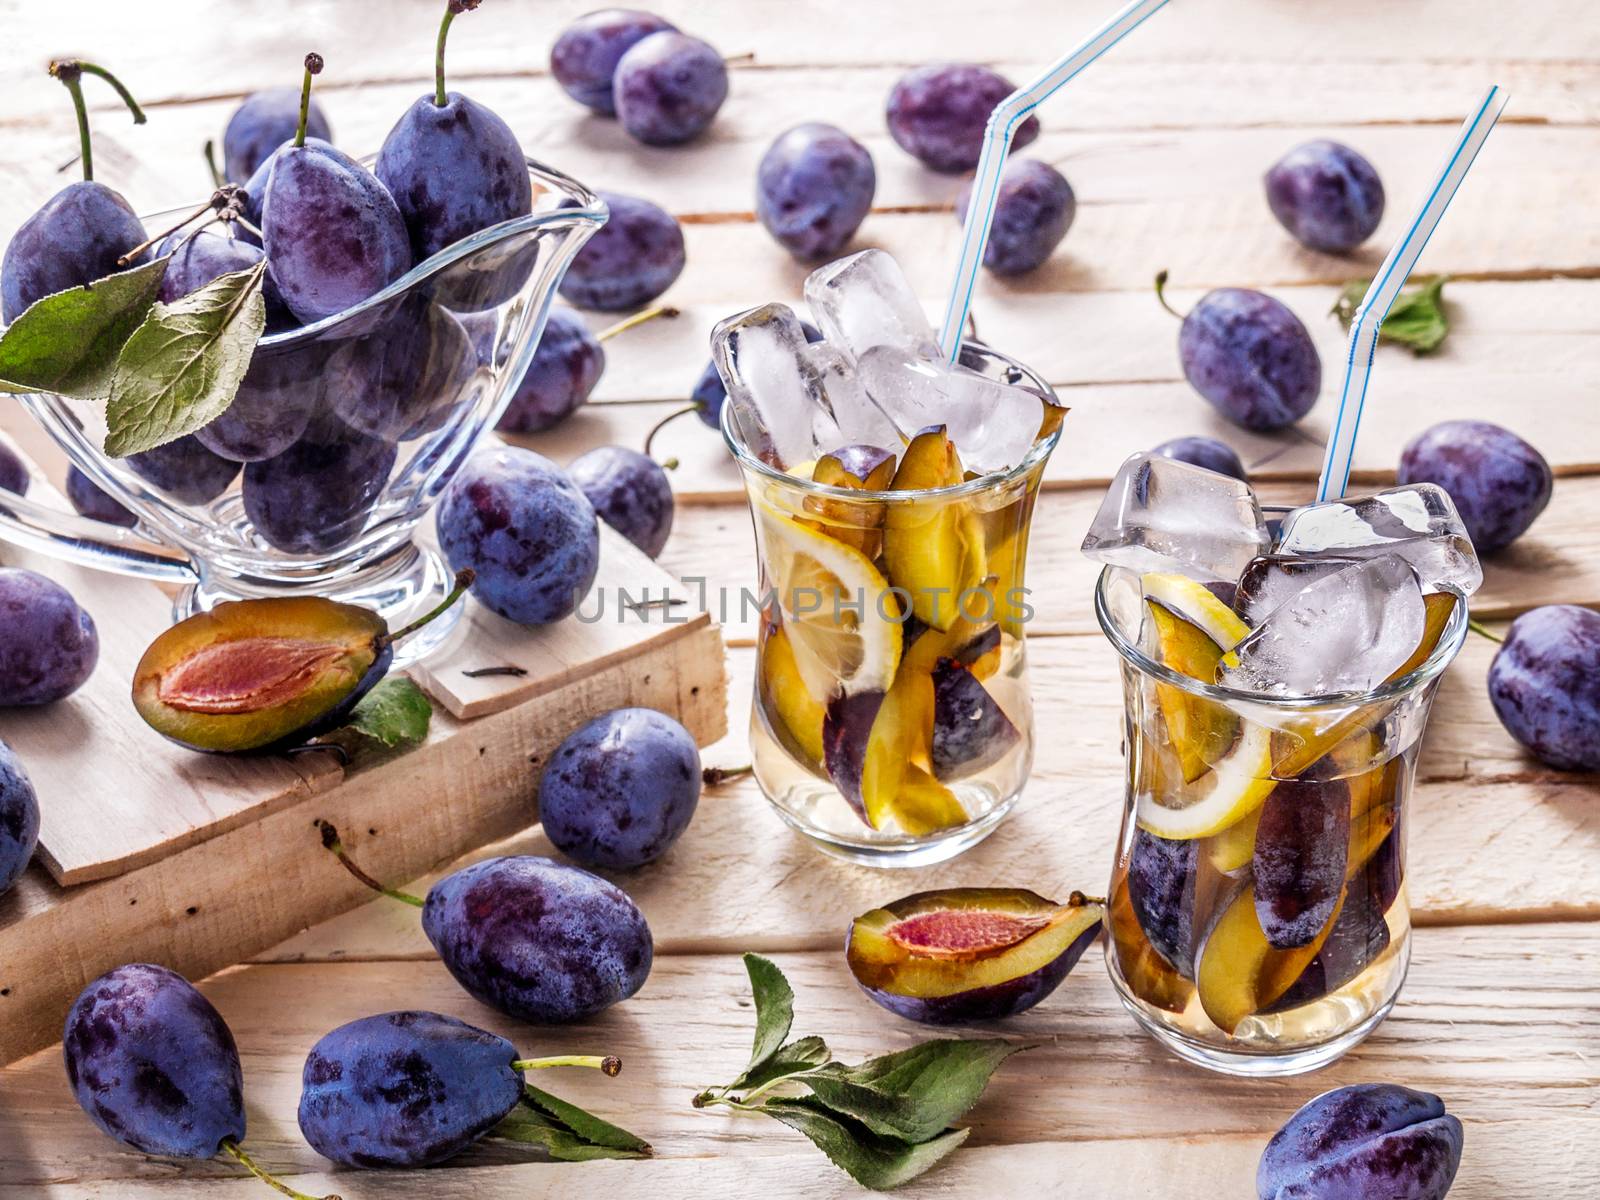 Refreshing drink from fresh juicy sweet sips with lemon in glass mugs with ice cubes on a wooden background with plums and green leaves with plums in a glass sauceboat